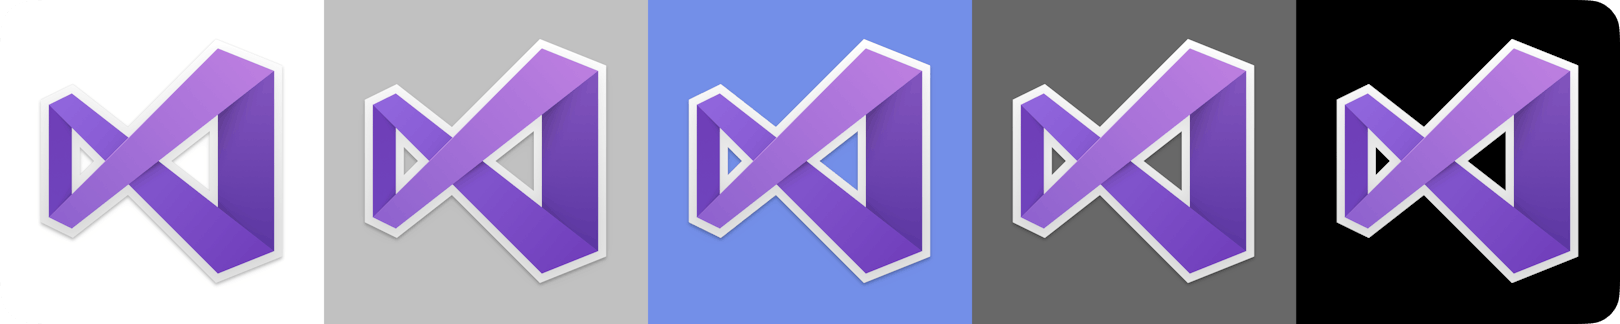 The Visual Studio for Mac icon on various backgrounds. The image demonstrates whether the icon functions effectively on different background colors and levels of brightness.